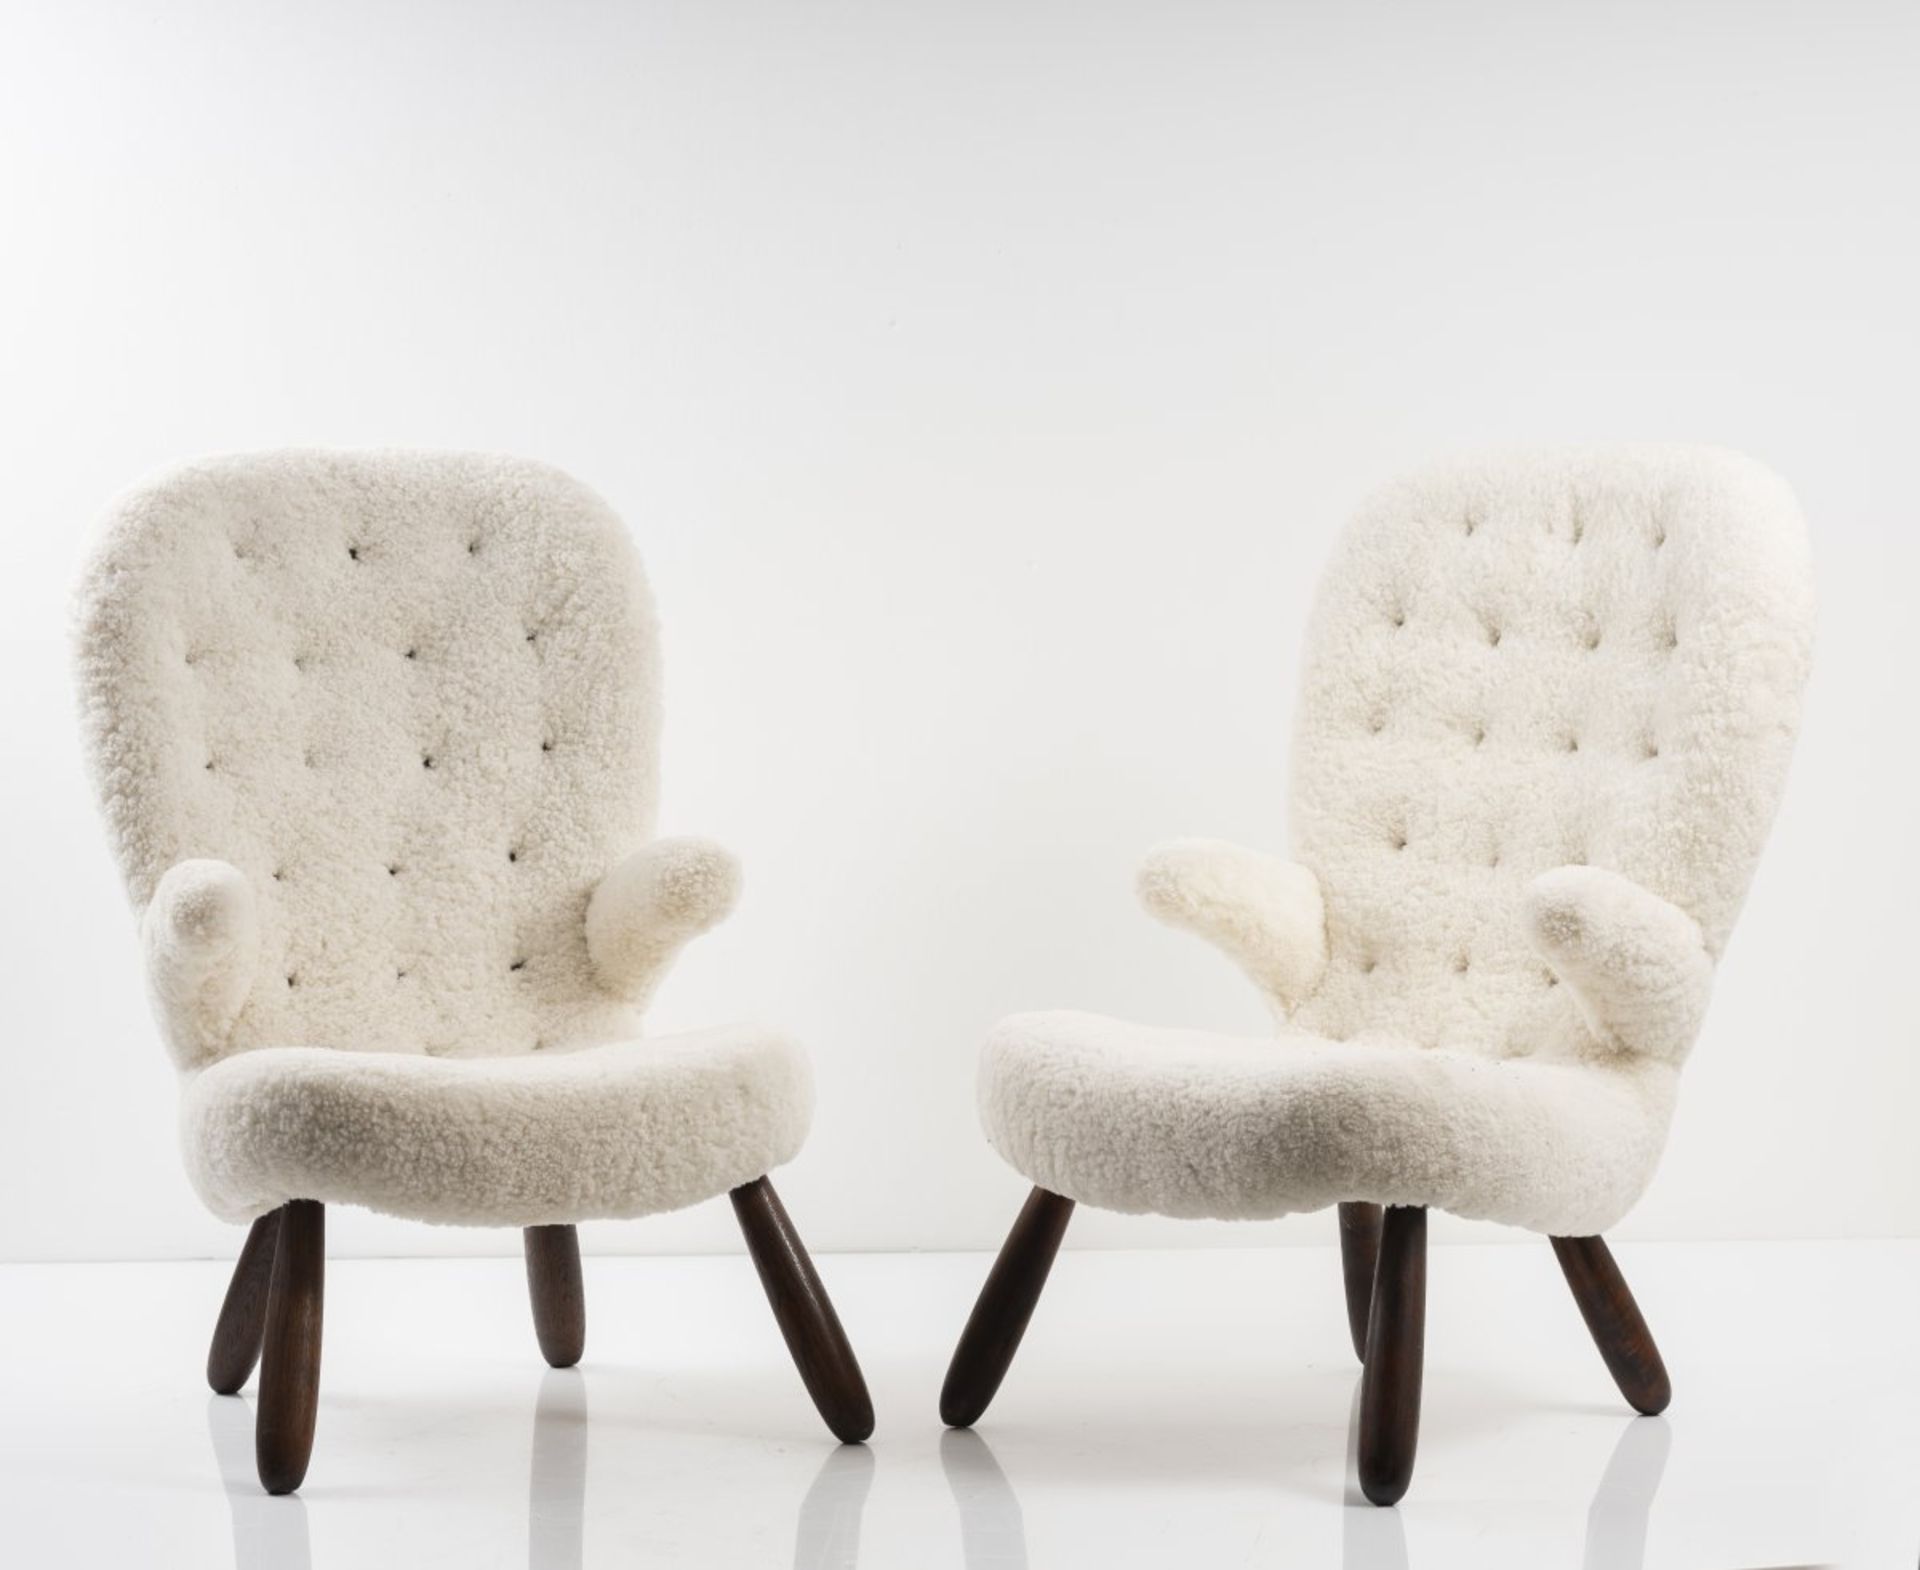 Philip Arctander (attributed), Set of two armchairs, c. 1952